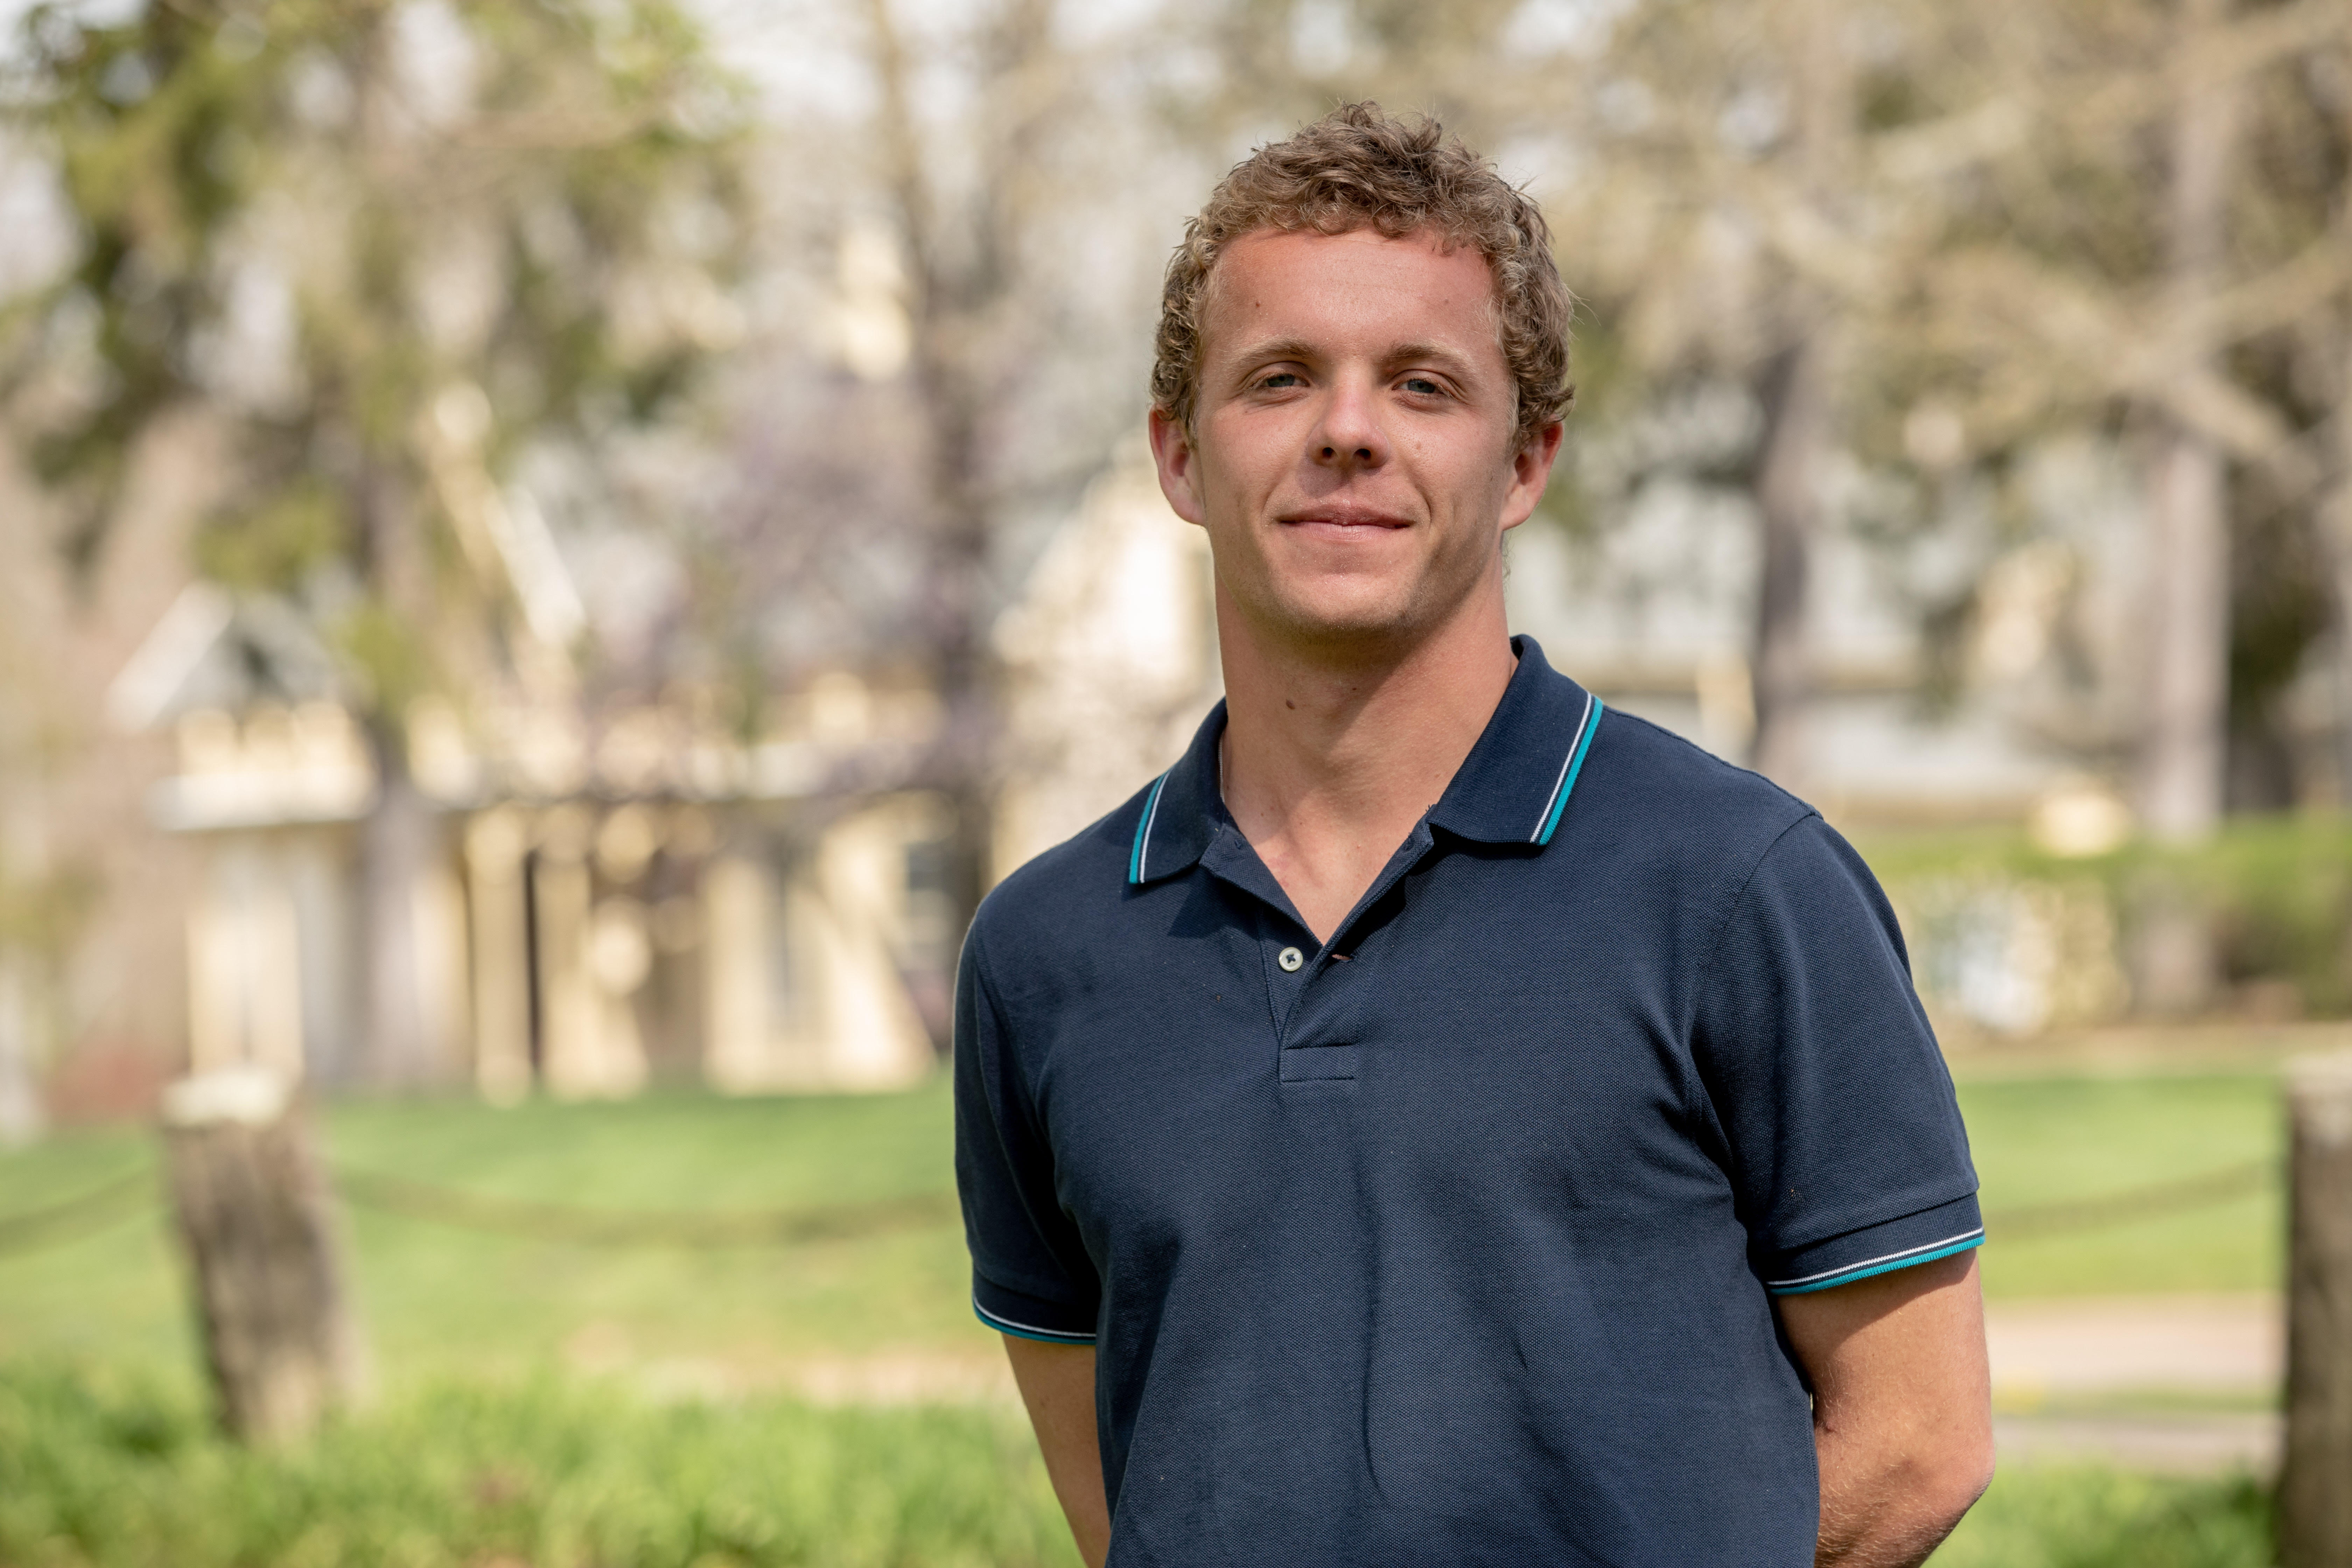 “Glocal” digits: Study Abroad alum Max Smith publishes research on cell phones in Africa